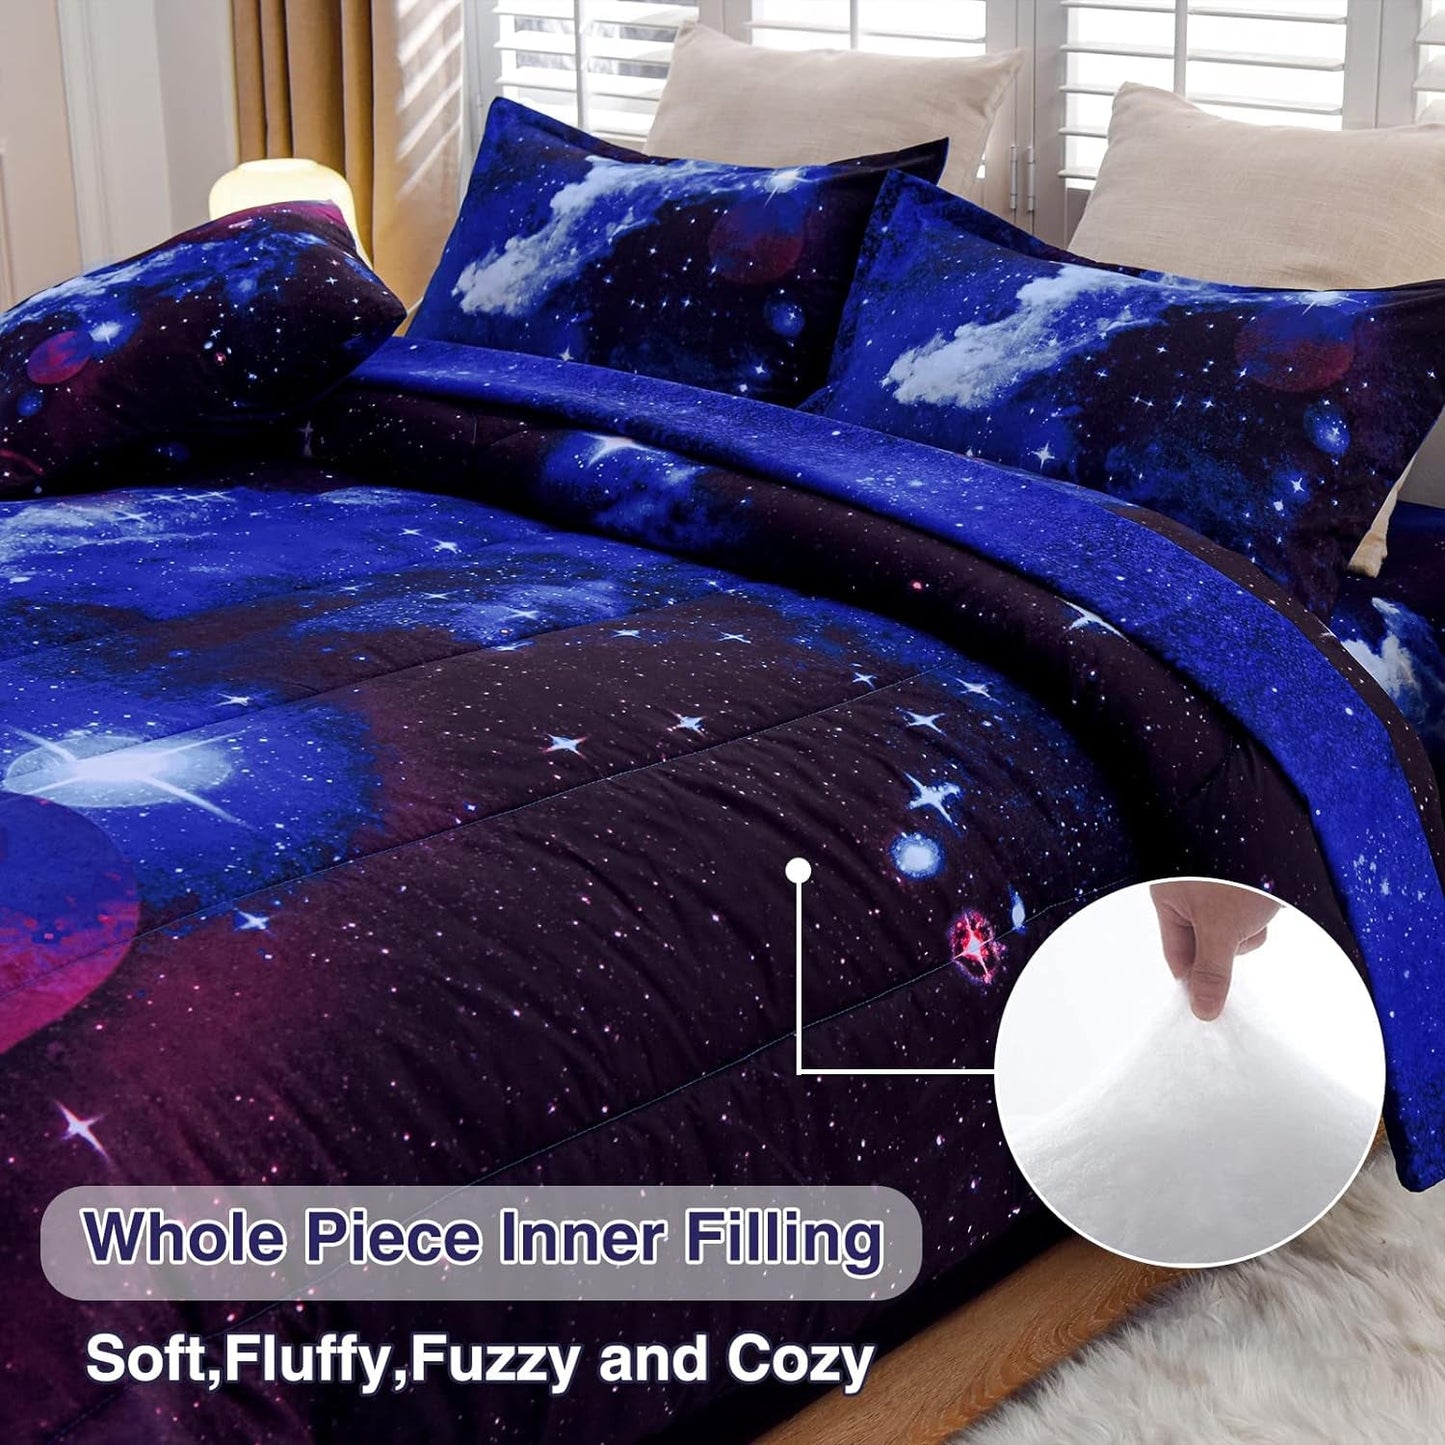 A Nice Night Galaxy 6Pcs Bedding Sets Outer Space Comforter Bed in a Bag 3D Printed Quilt,For Children Boy Girl Teen Kids,Twin 6Pcs